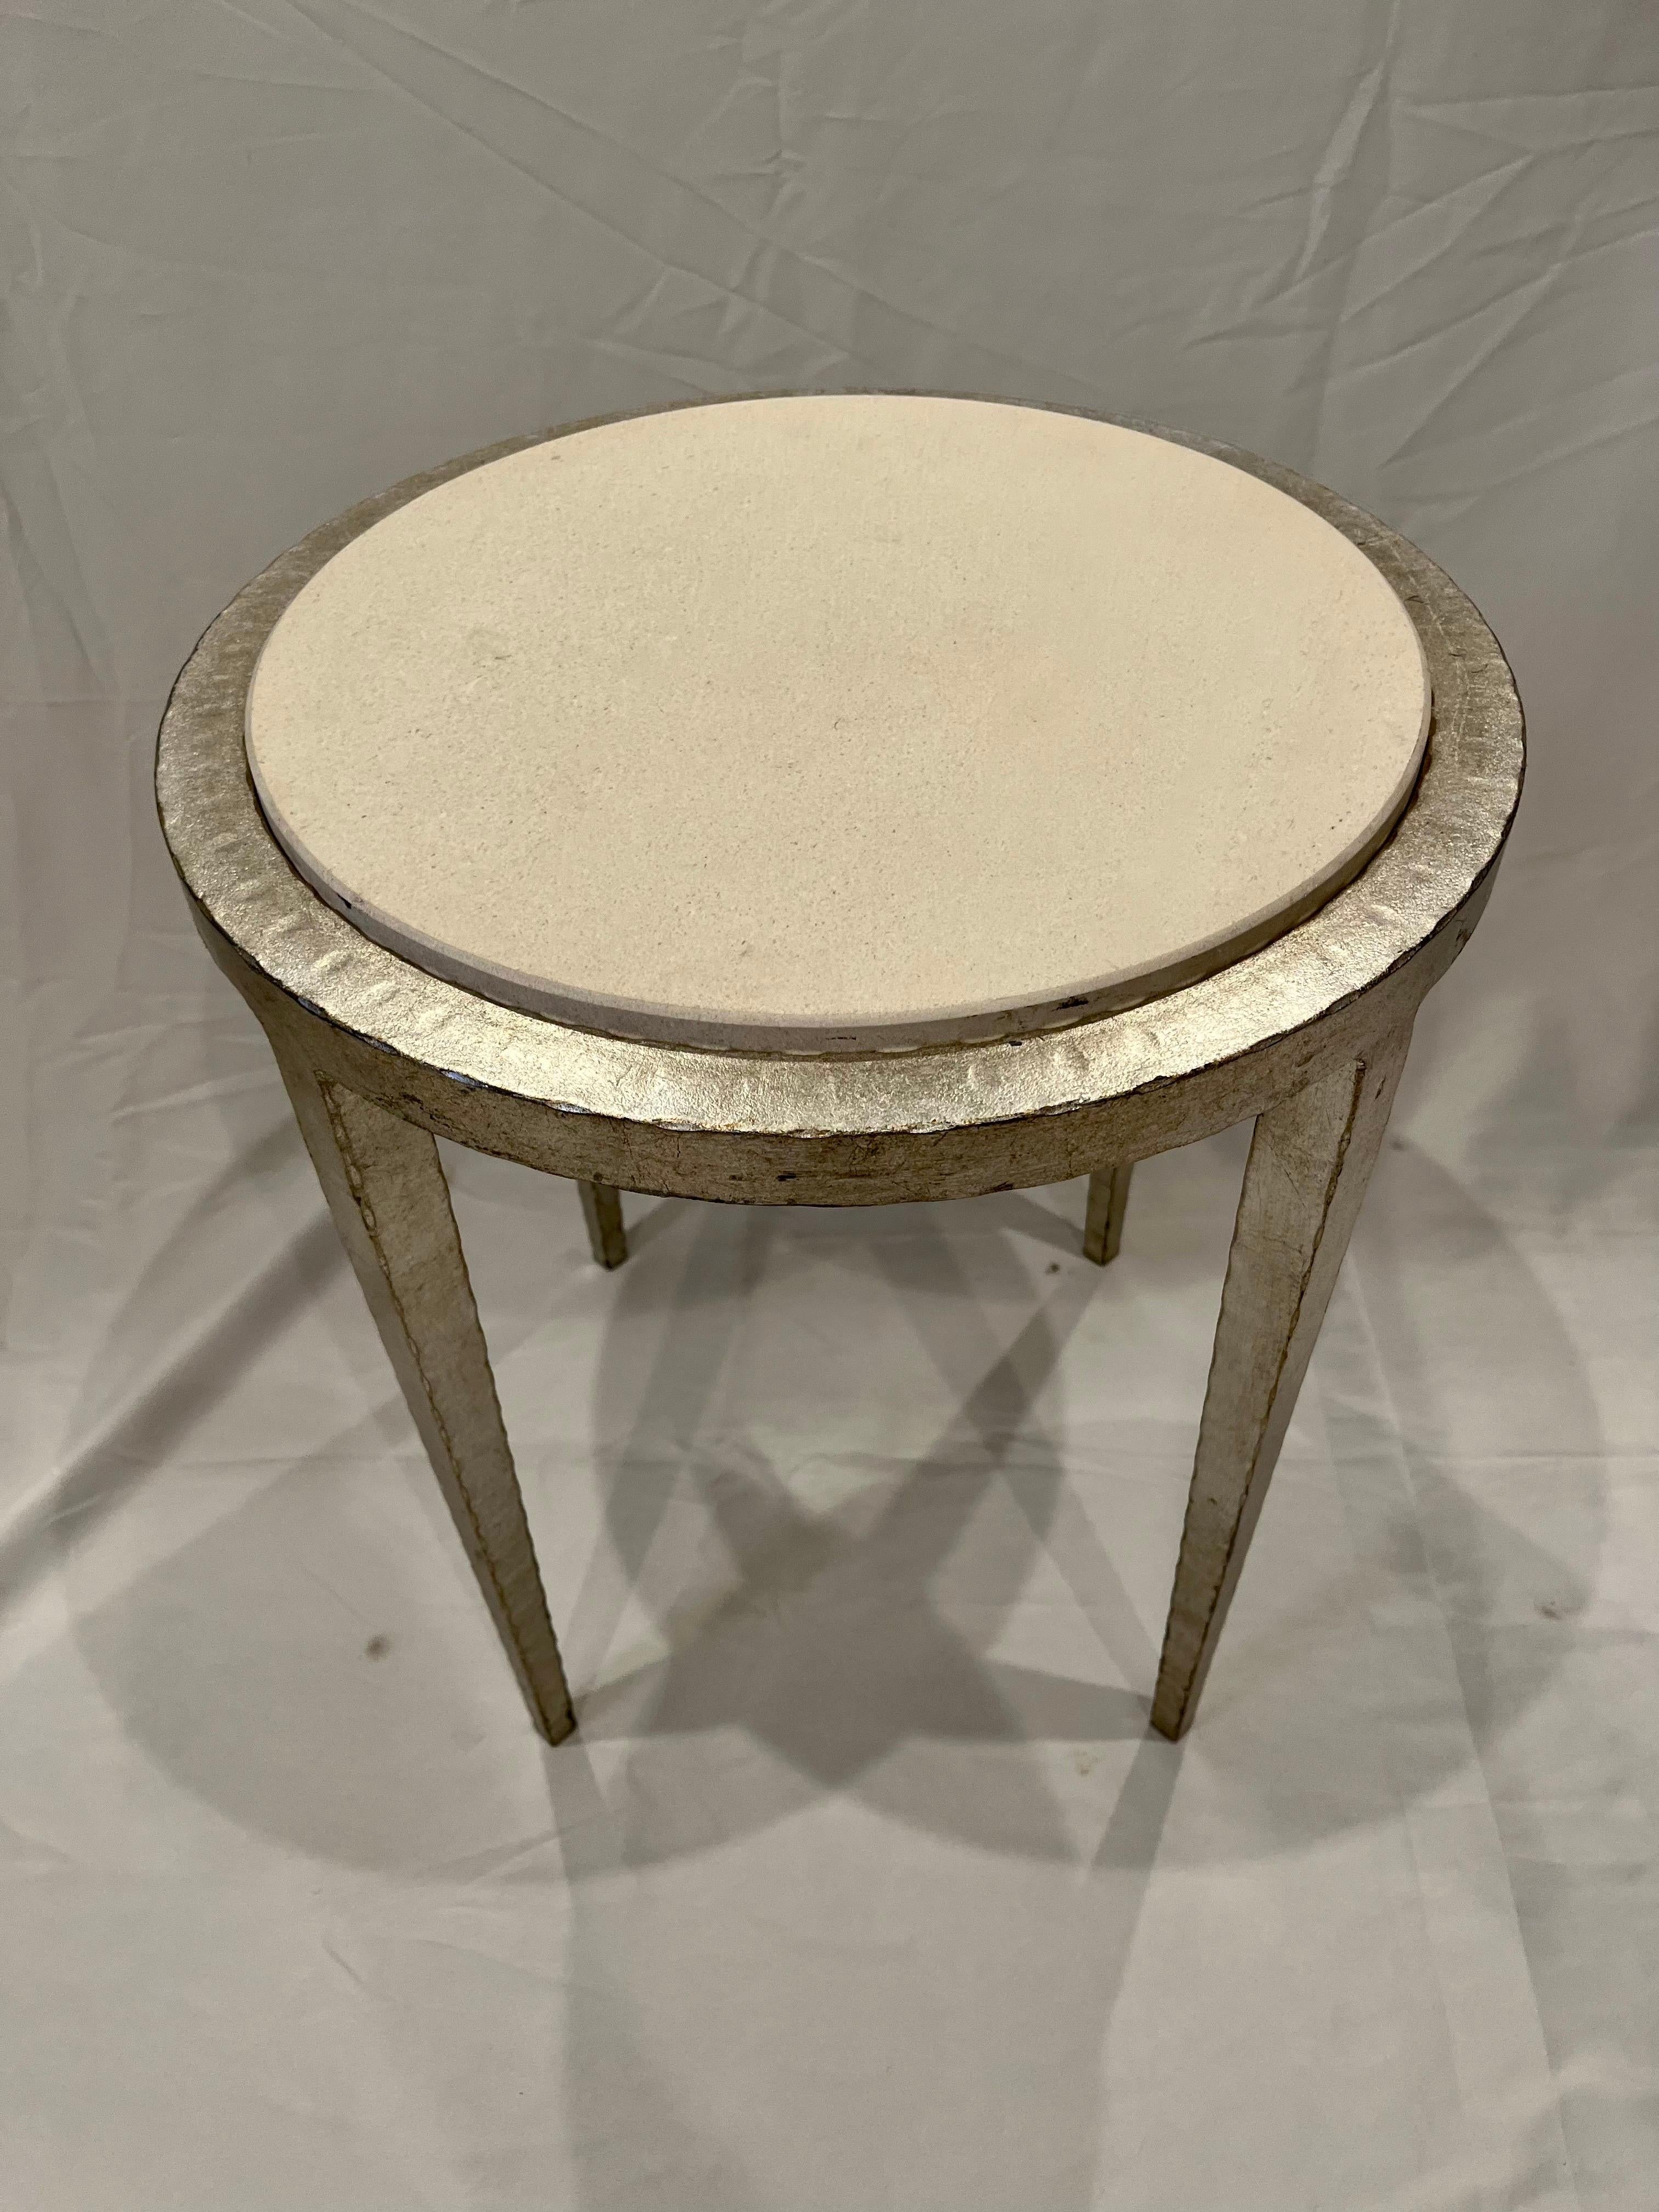 Stunning silver leaf iron table with stone top. Modern classic lines with etched or hammered hepplewhite legs. Beautiful complimenting white stone top framed in same.
Curbside to NYC/Philly $300